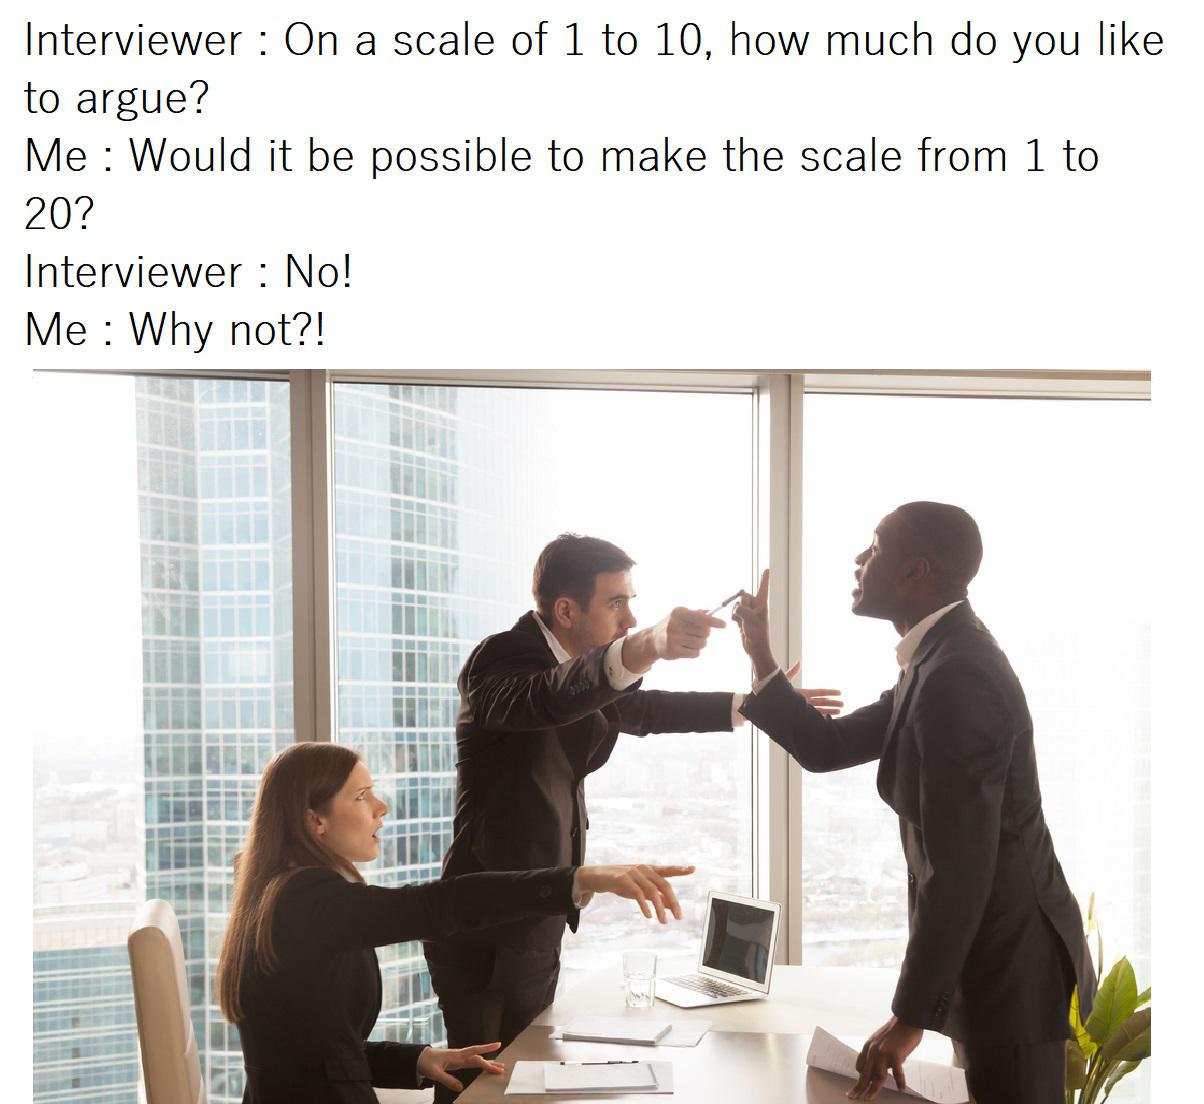 dank memes - crucial communication - Interviewer On a scale of 1 to 10, how much do you to argue? Me Would it be possible to make the scale from 1 to 20? Interviewer No! Me Why not?!